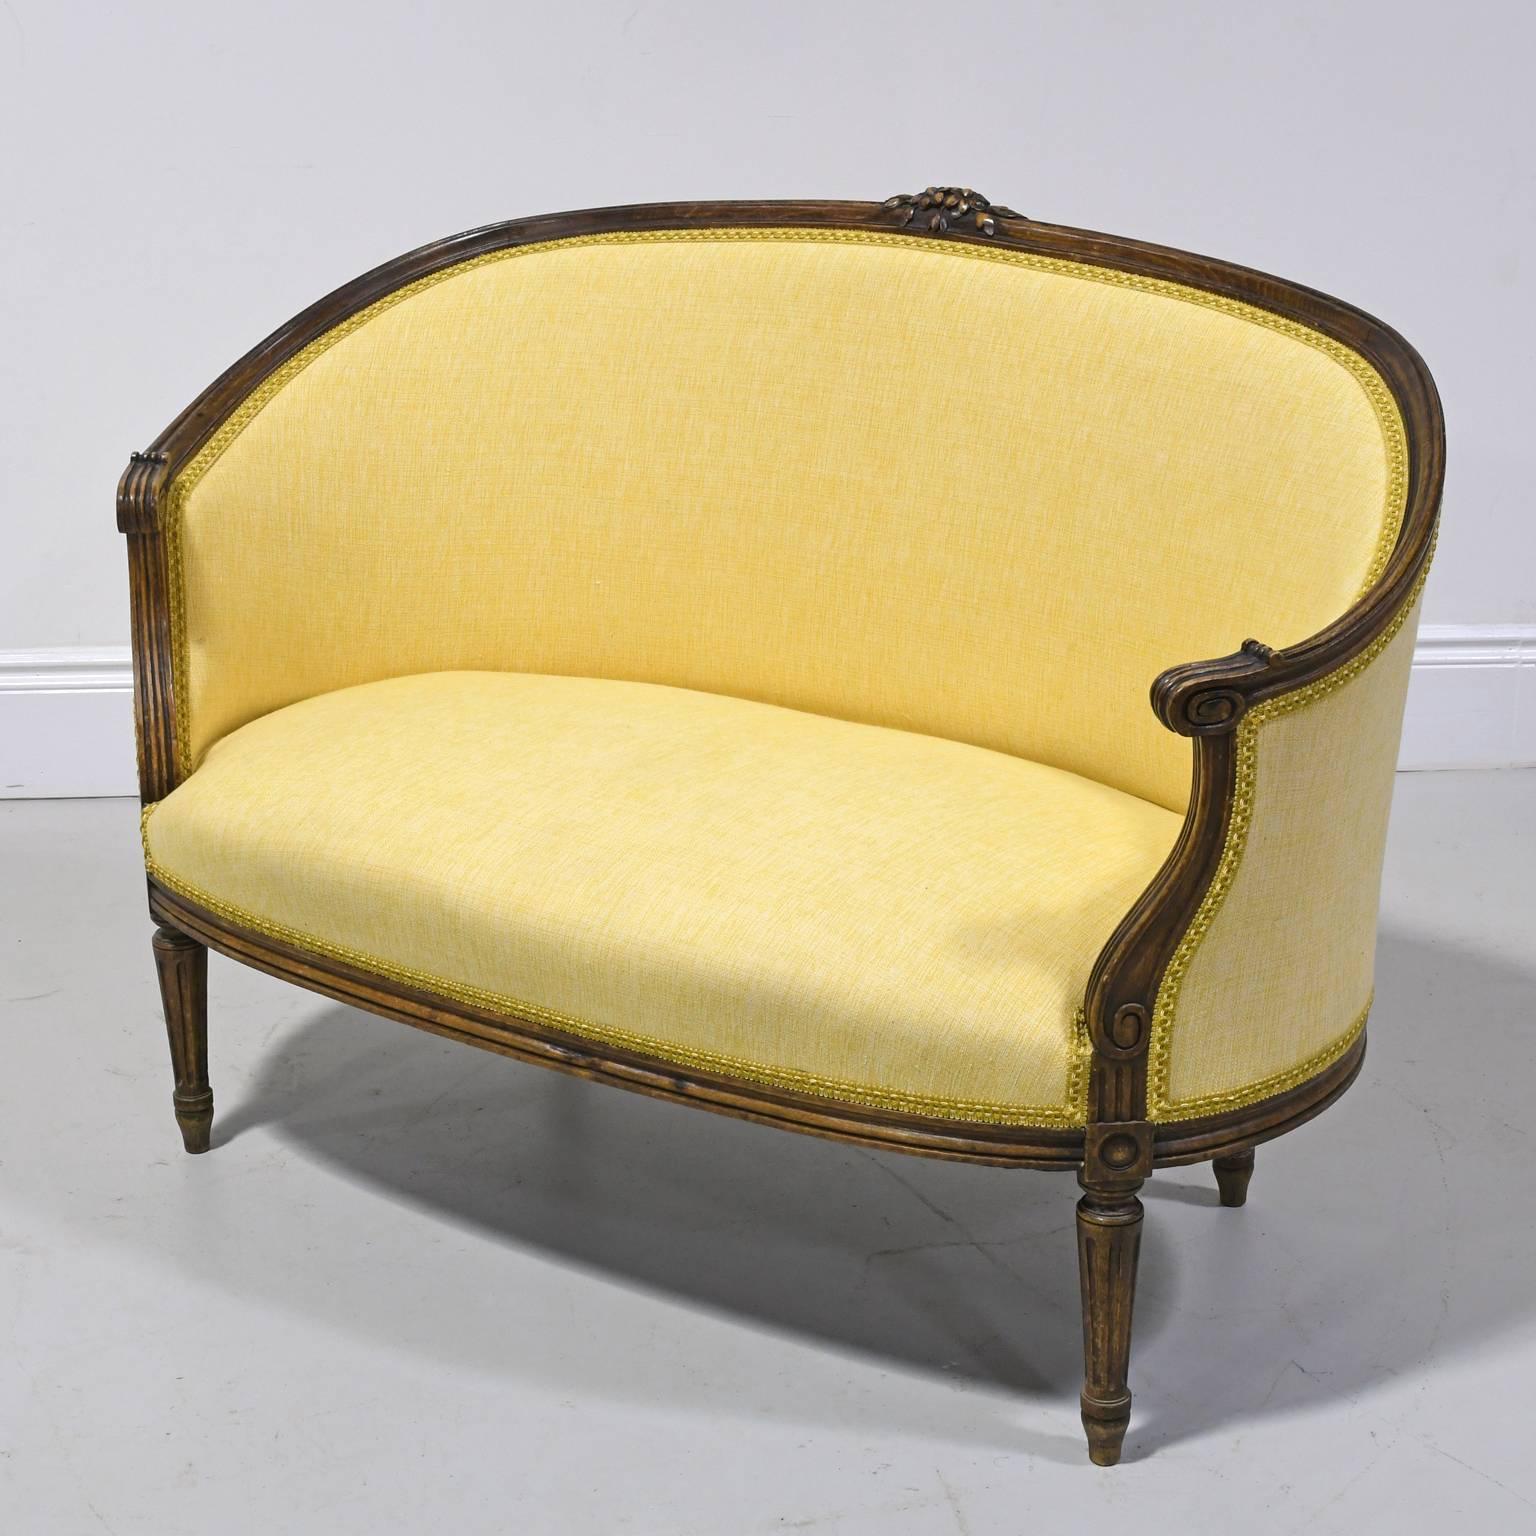 A lovely Louis XVI style canape or loveseat with walnut frame in gondola-form with upholstery, carved floral crest, scrolled arms, and resting on turned and fluted legs, France, circa late 1800s.
A beautiful addition at the foot of a bed, in a foyer